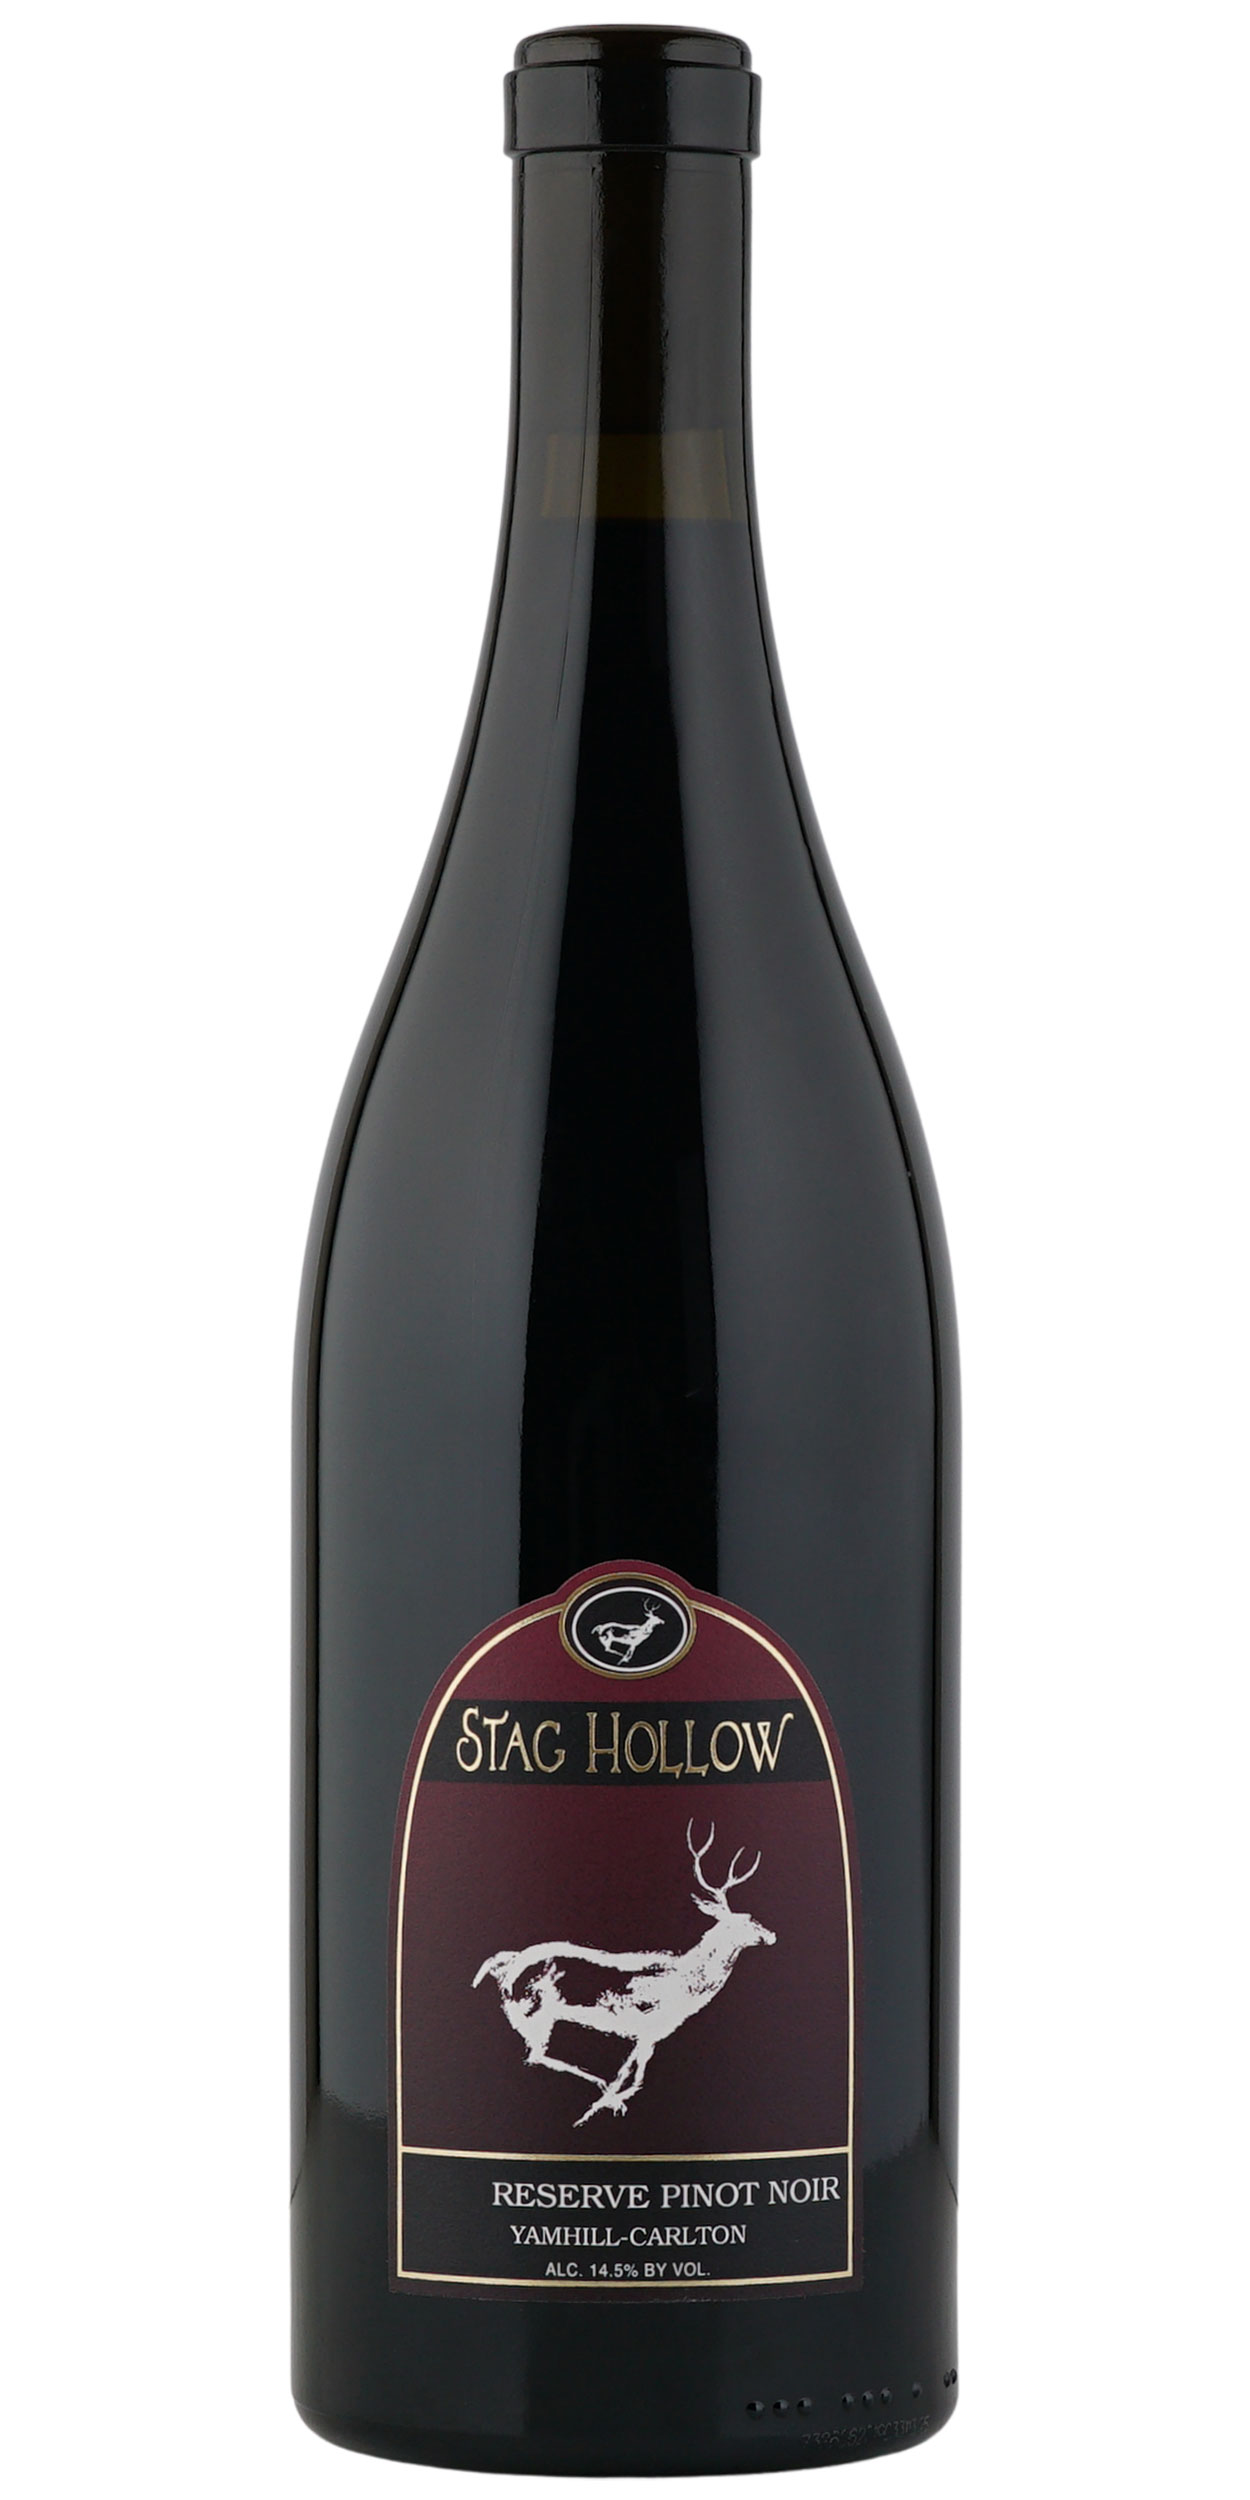 Bottle of Stag Hollow Reserve Pinot Noir